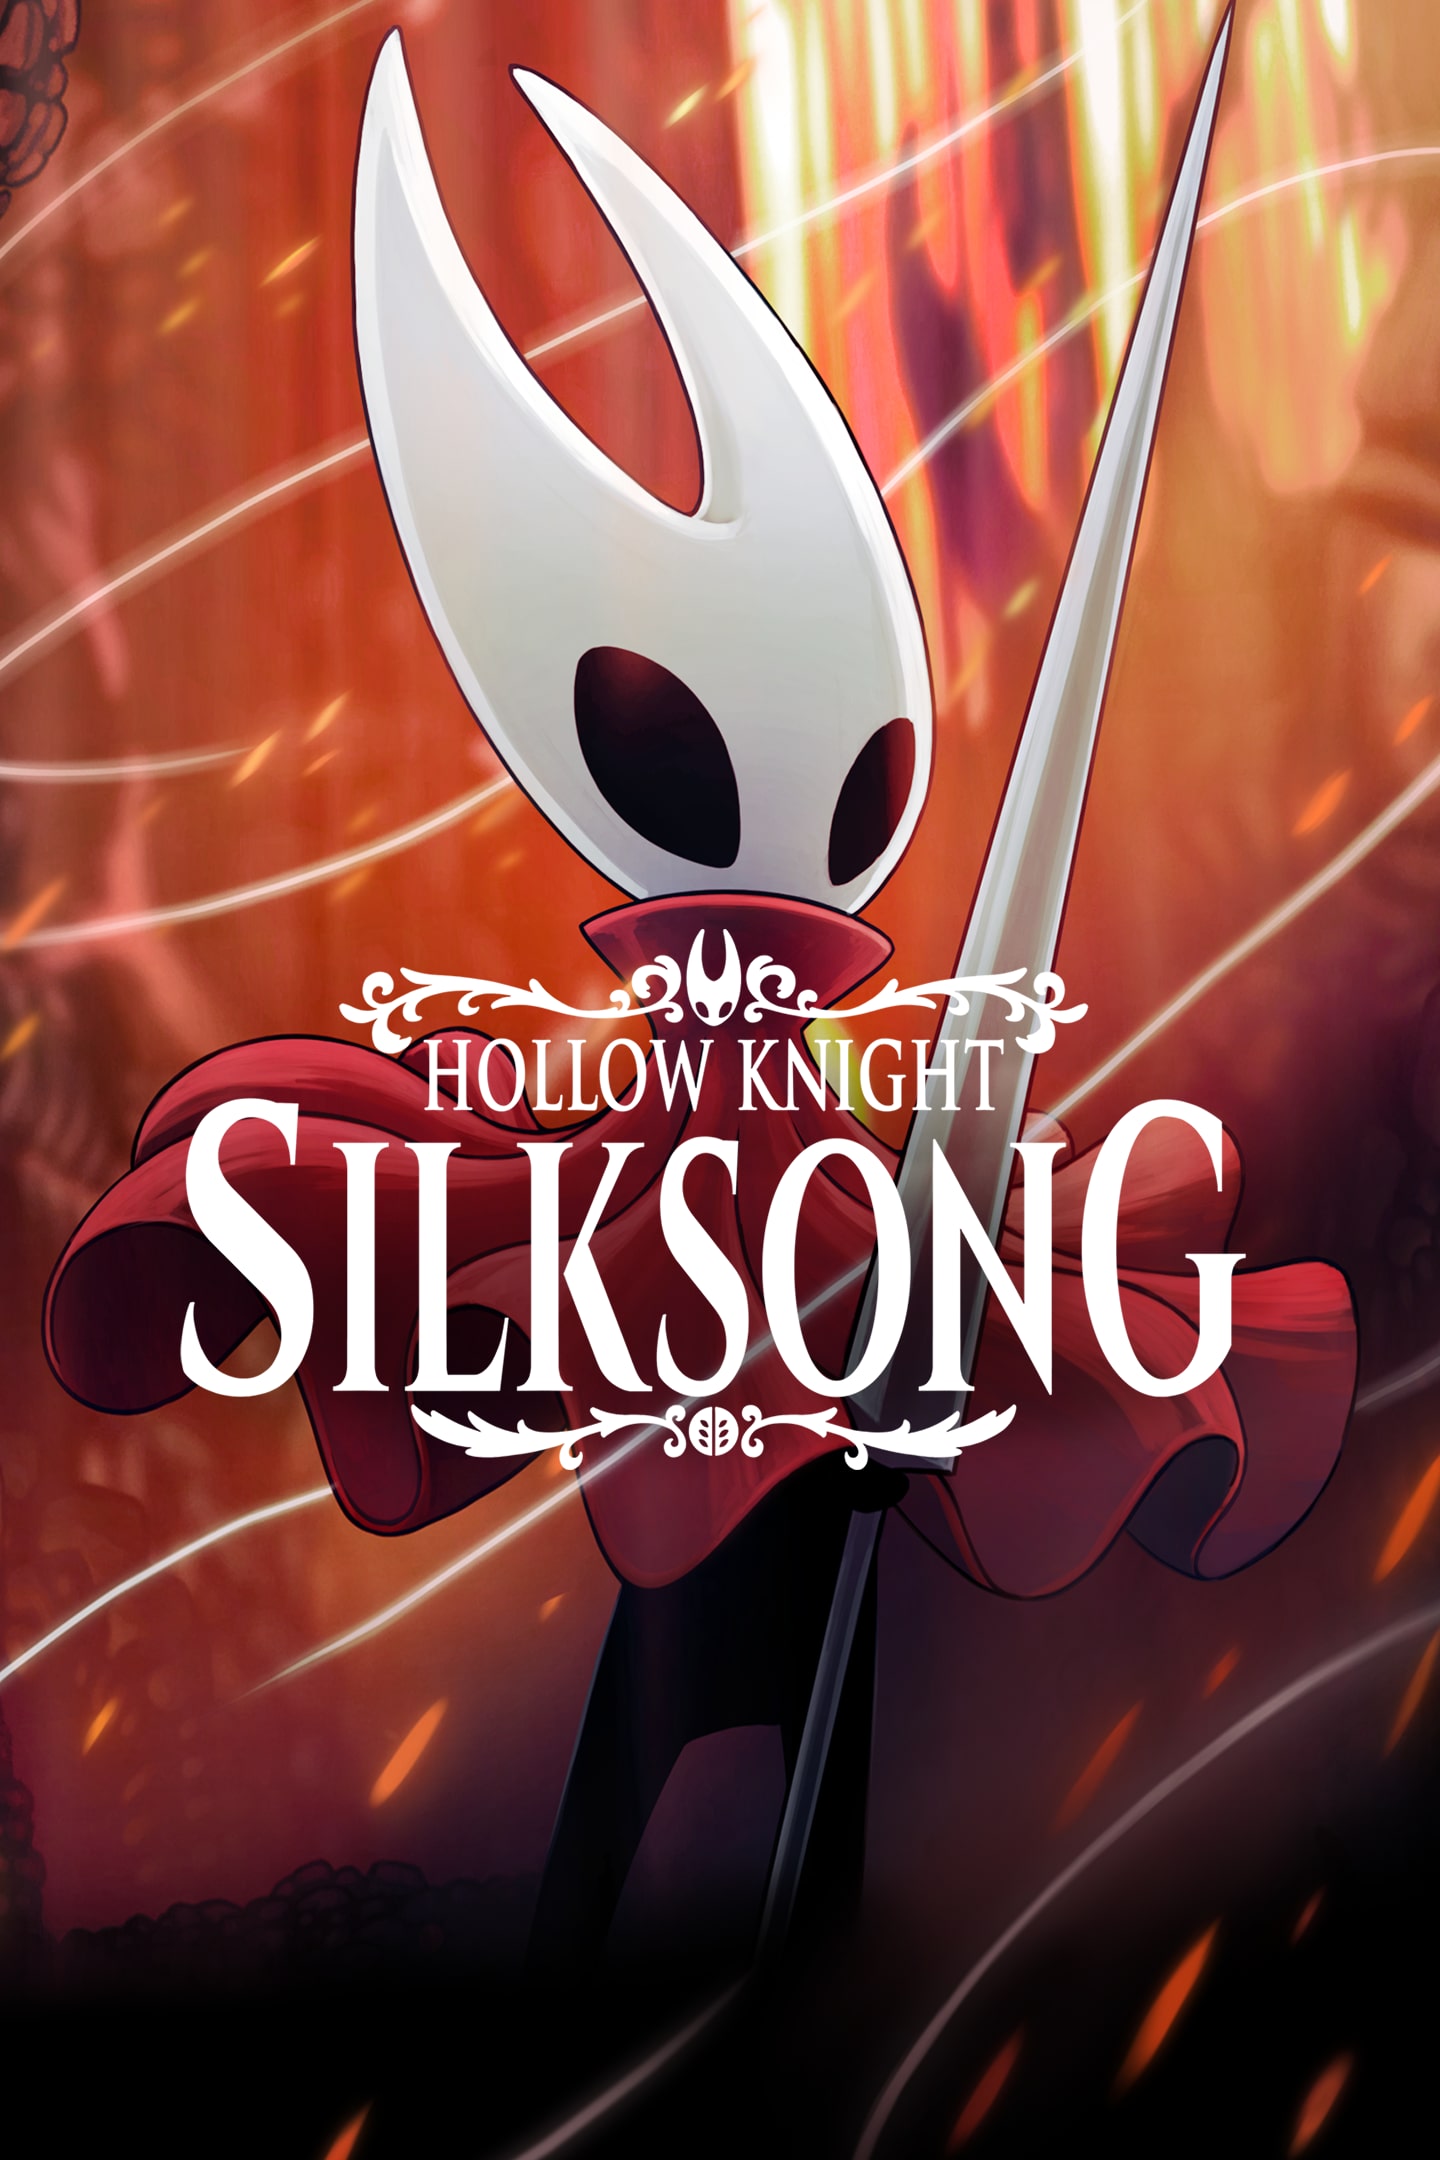 Hollow Knight: Silksong PS4 & PS5 Version Confirmed by Team Cherry